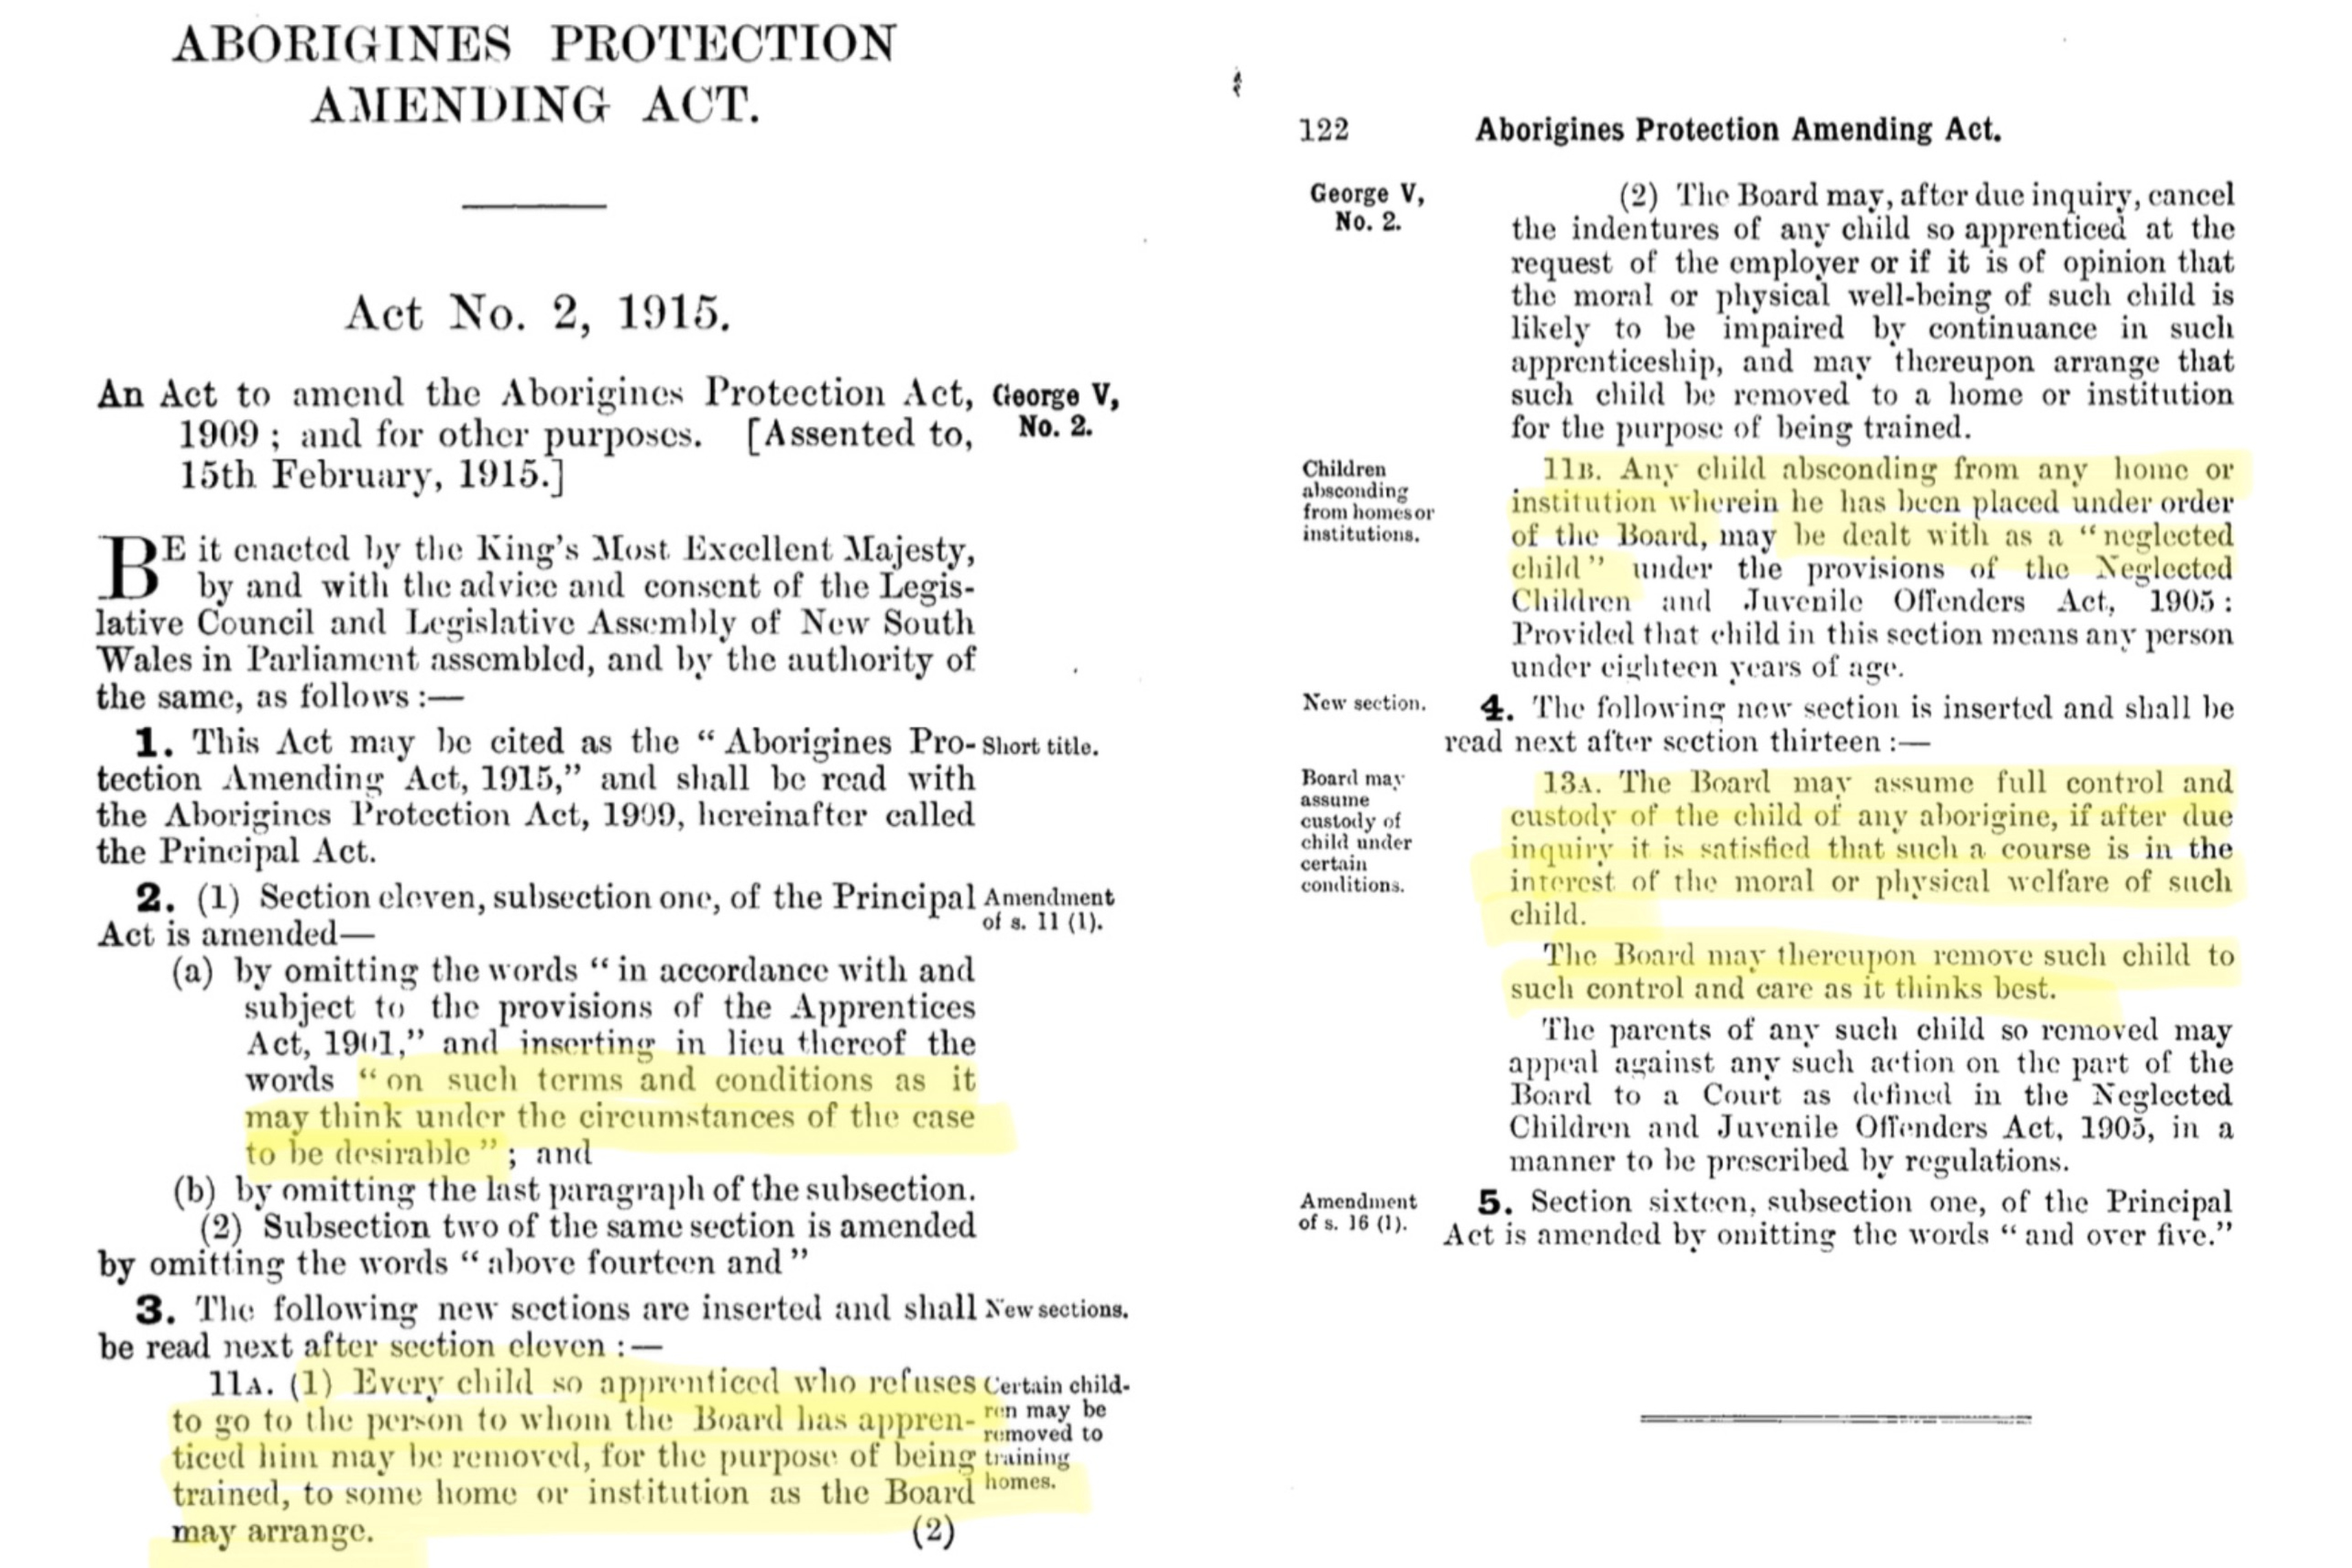 Aboriginies Protection Act documents pasted together with passages highlighted